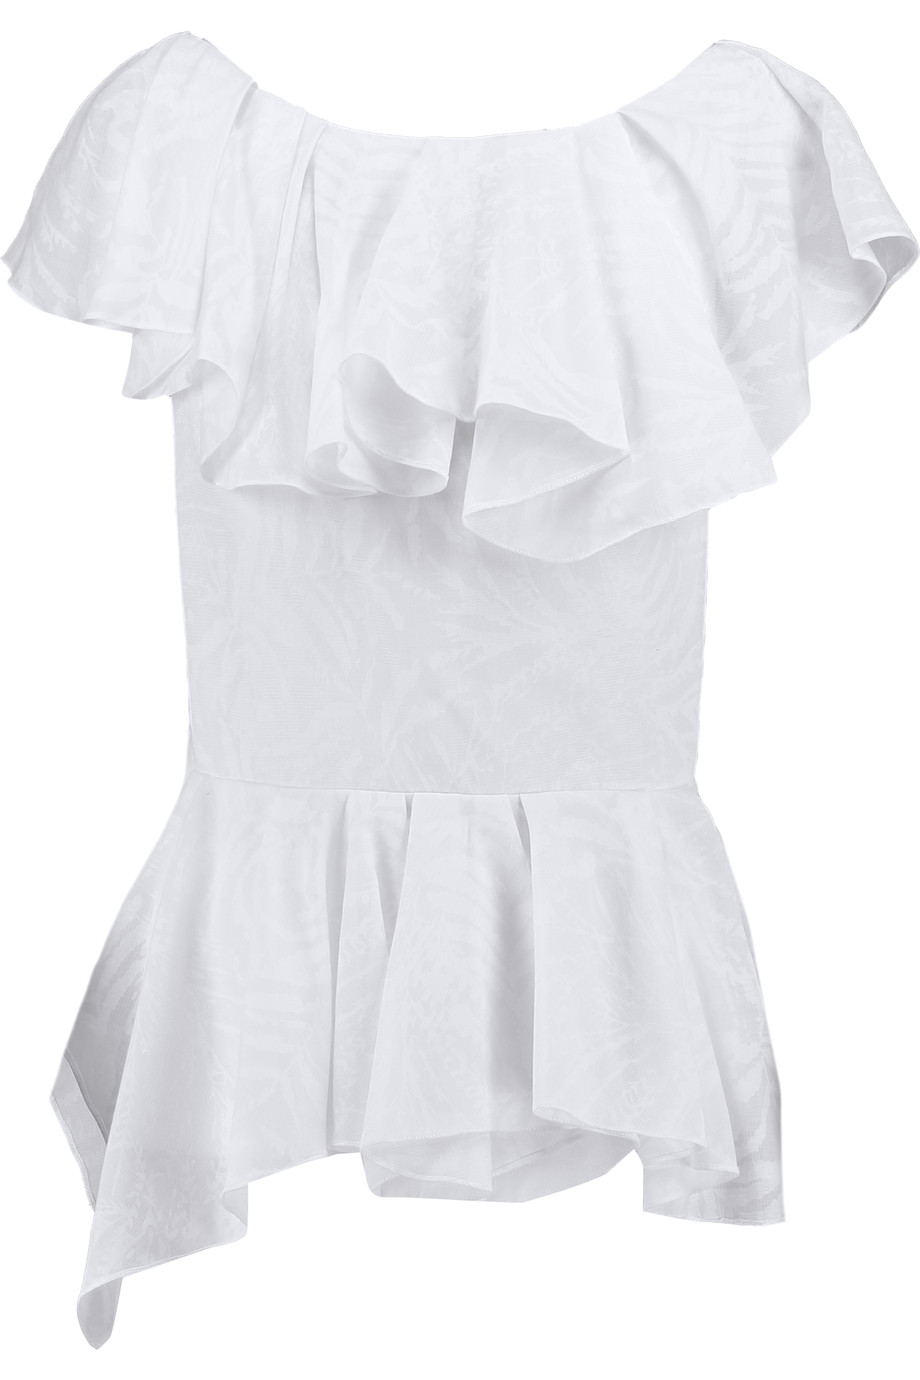 Chalayan Valance Ruffled Voile Top | ModeSens